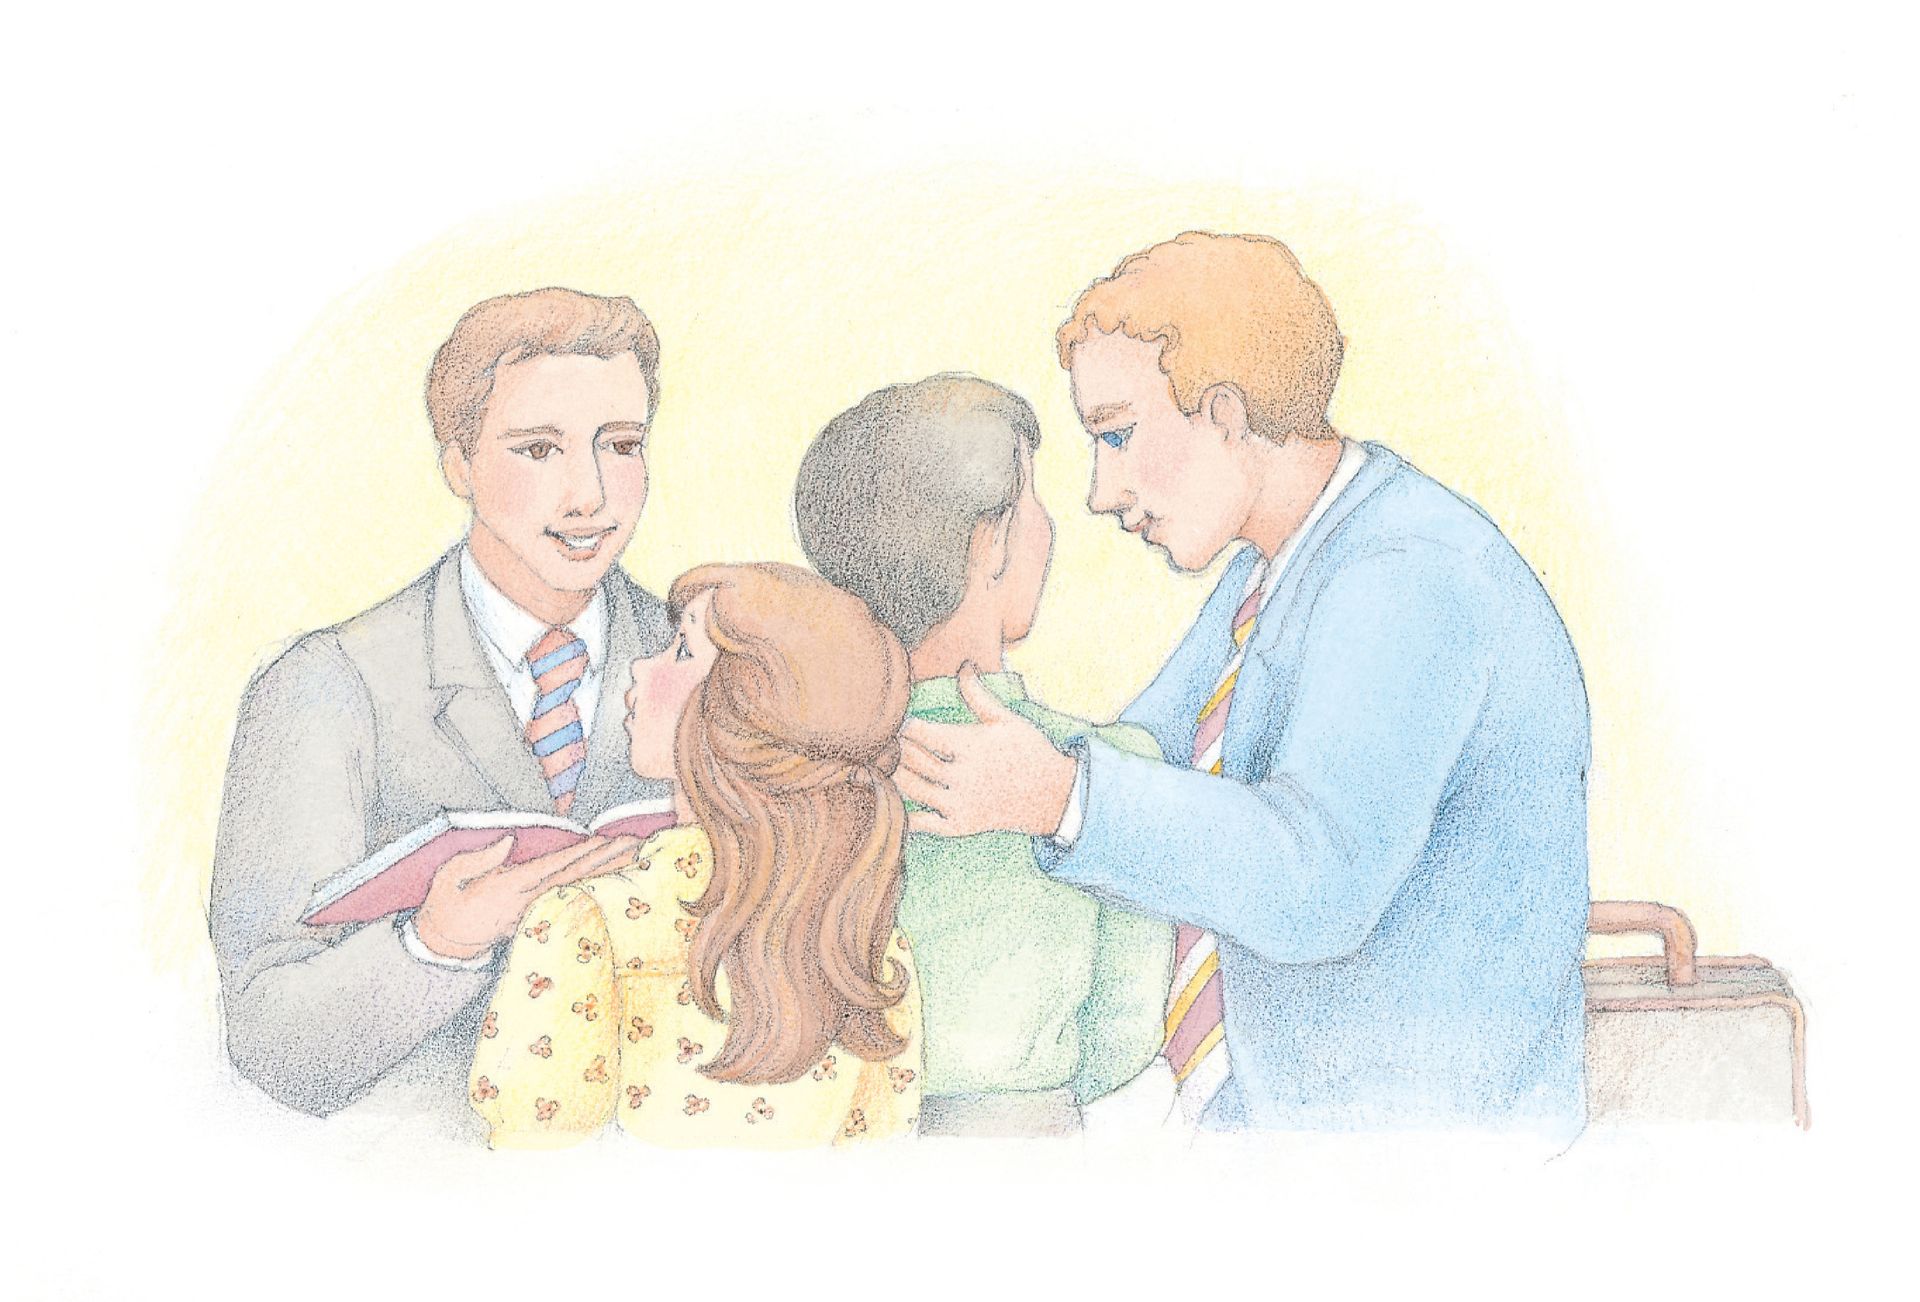 Two missionaries talking to a young boy and girl. From the Children’s Songbook, page 174, “Called to Serve”; watercolor illustration by Phyllis Luch.